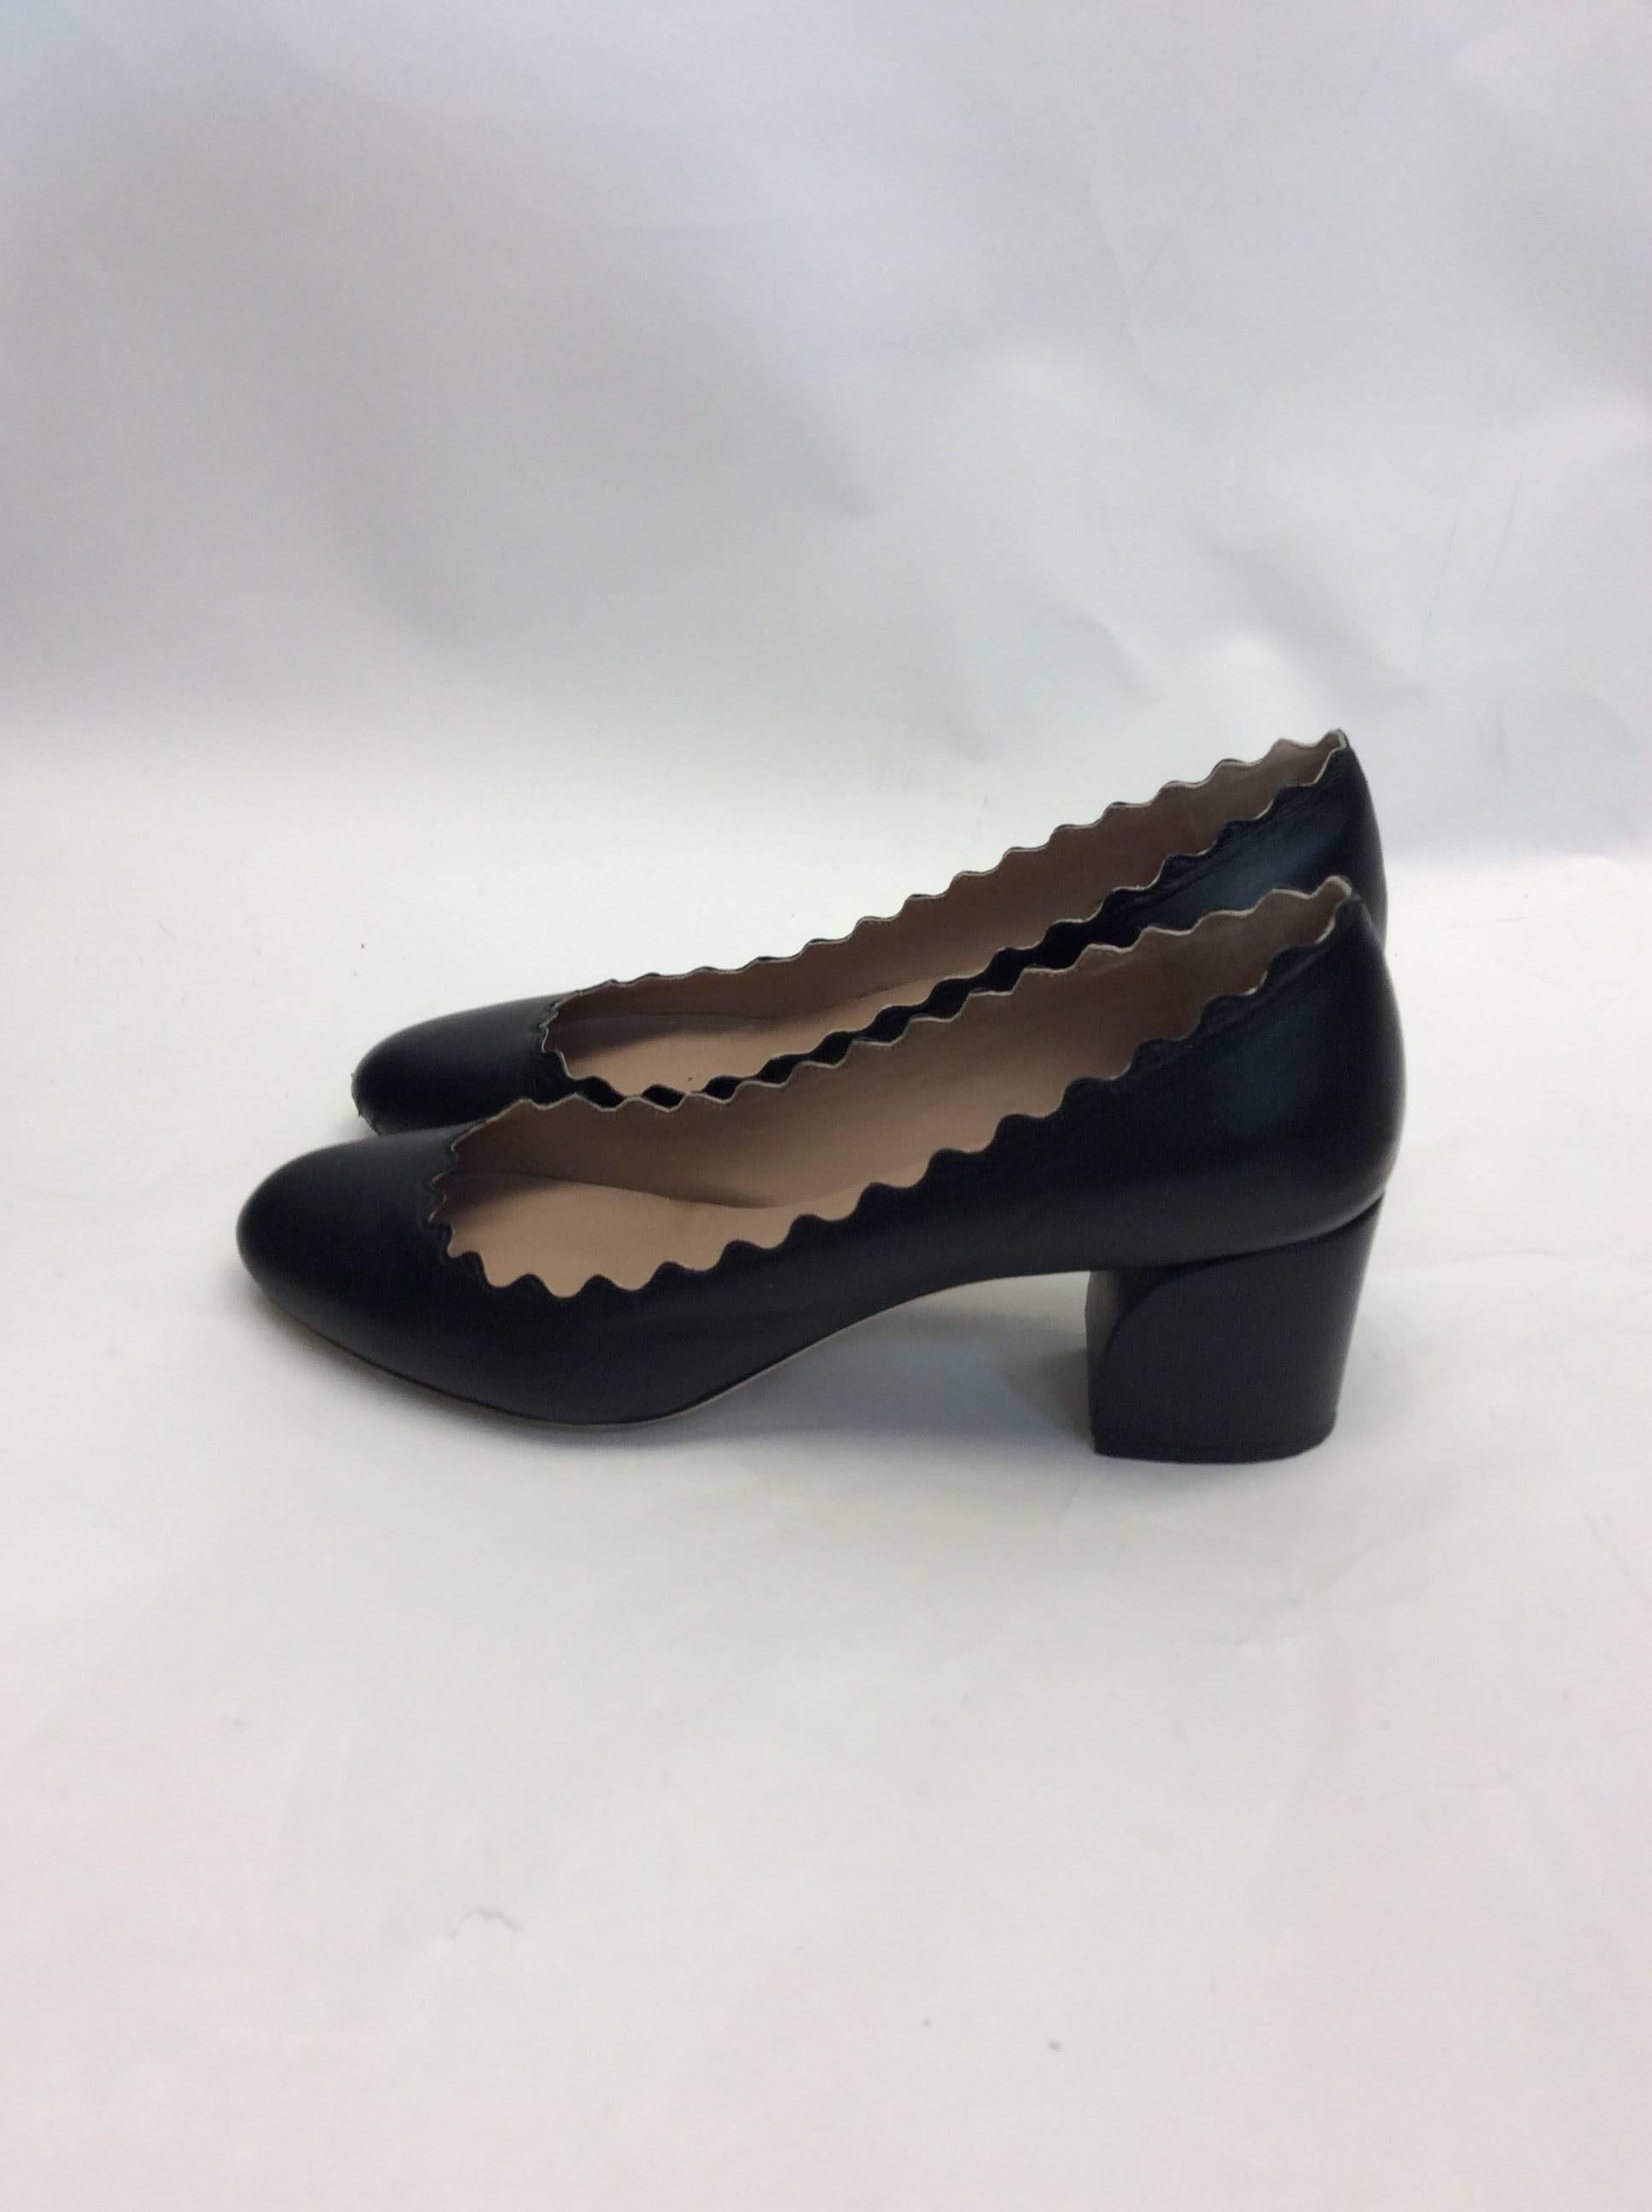 Chloe Black Scalloped Heels In Excellent Condition For Sale In Narberth, PA